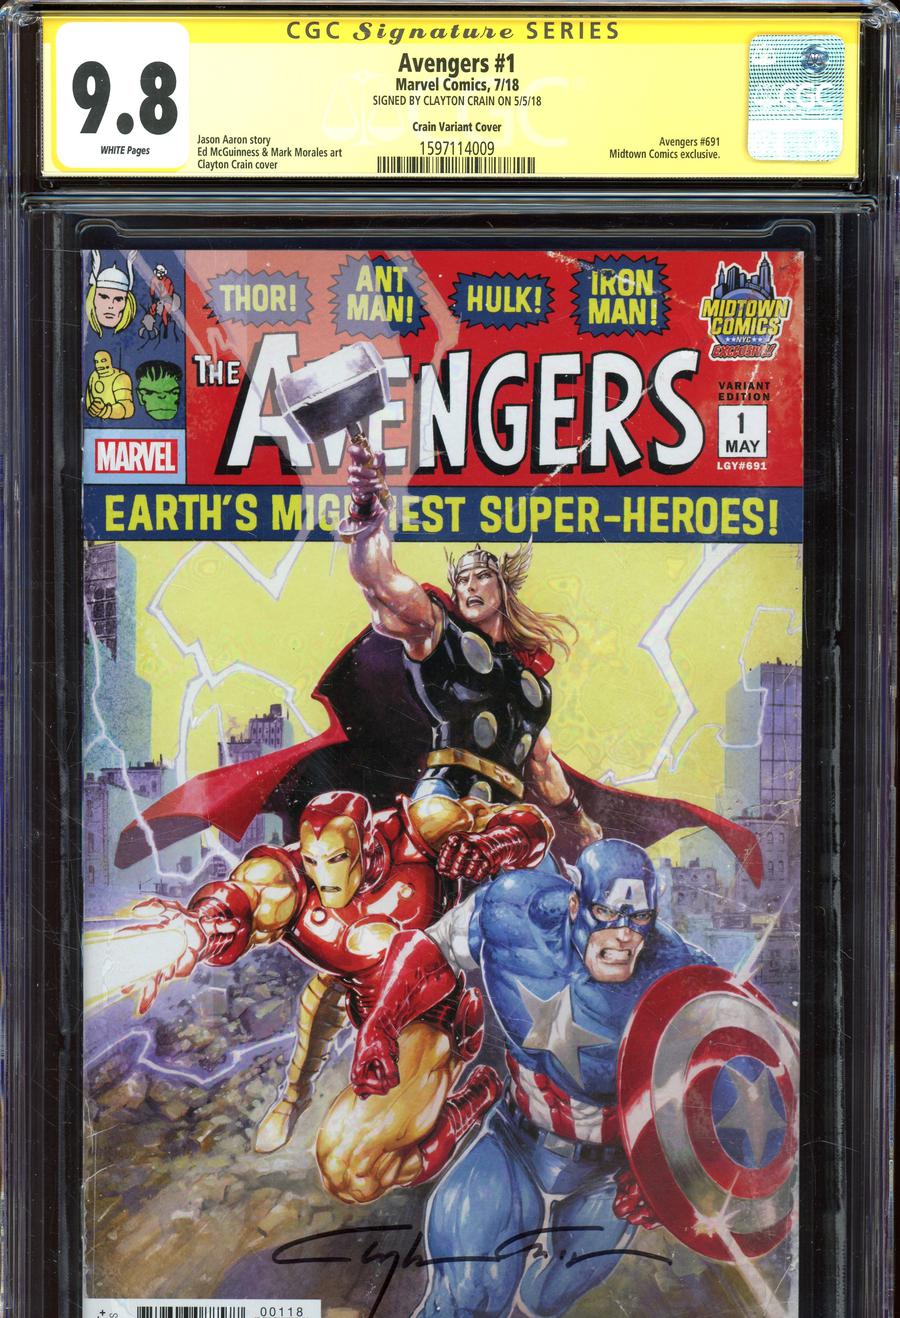 Avengers Vol 7 #1  Midtown Exclusive Clayton Crain Variant Cover Signed By Clayton Crain CGC 9.8